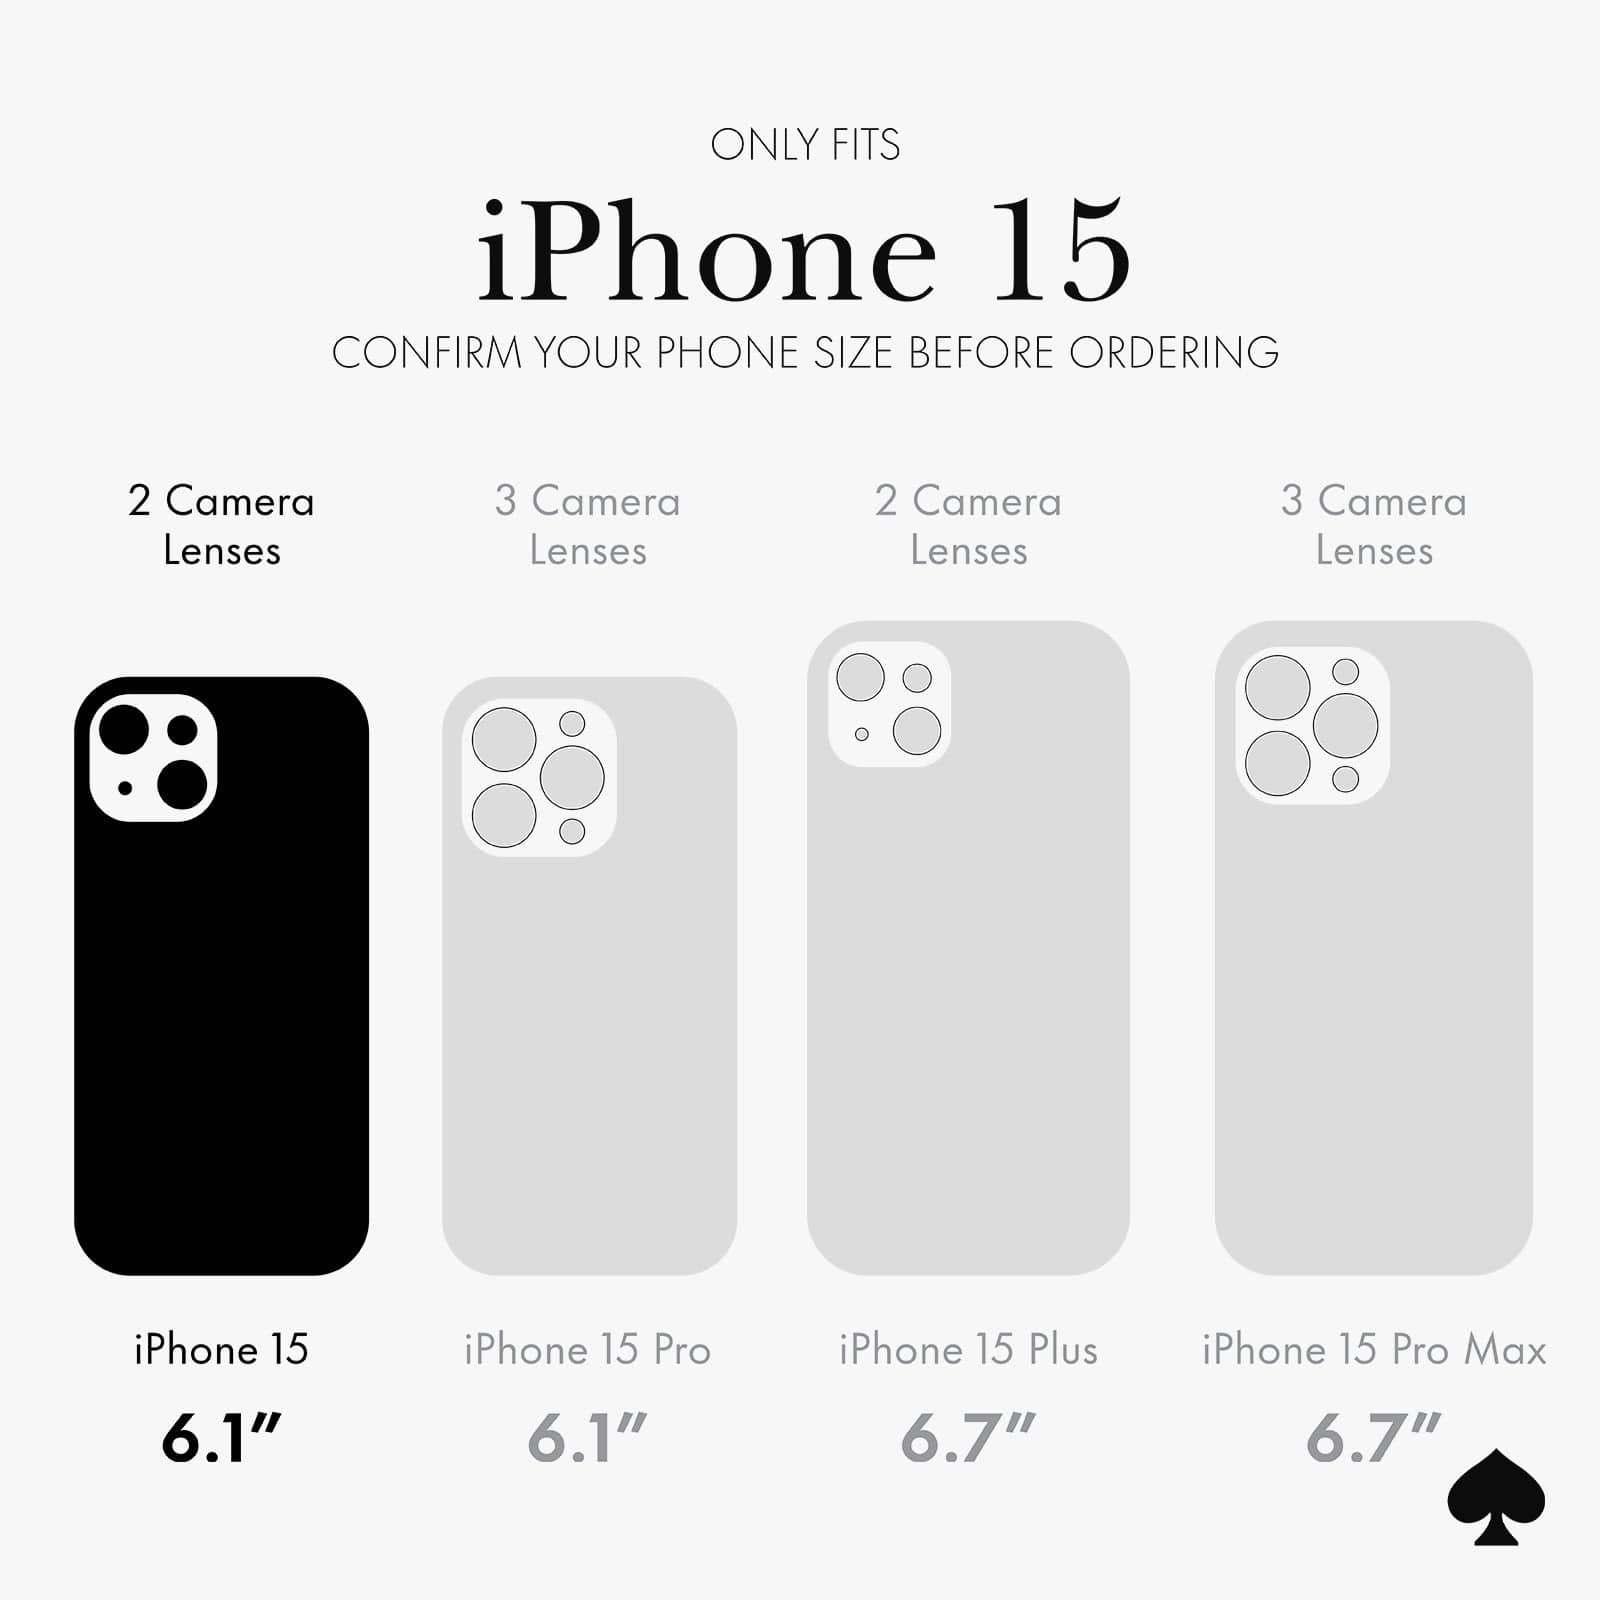 ONLY FITS IPHONE 15 CONFIRM YOUR PHONE SIZE BEFORE ORDERING